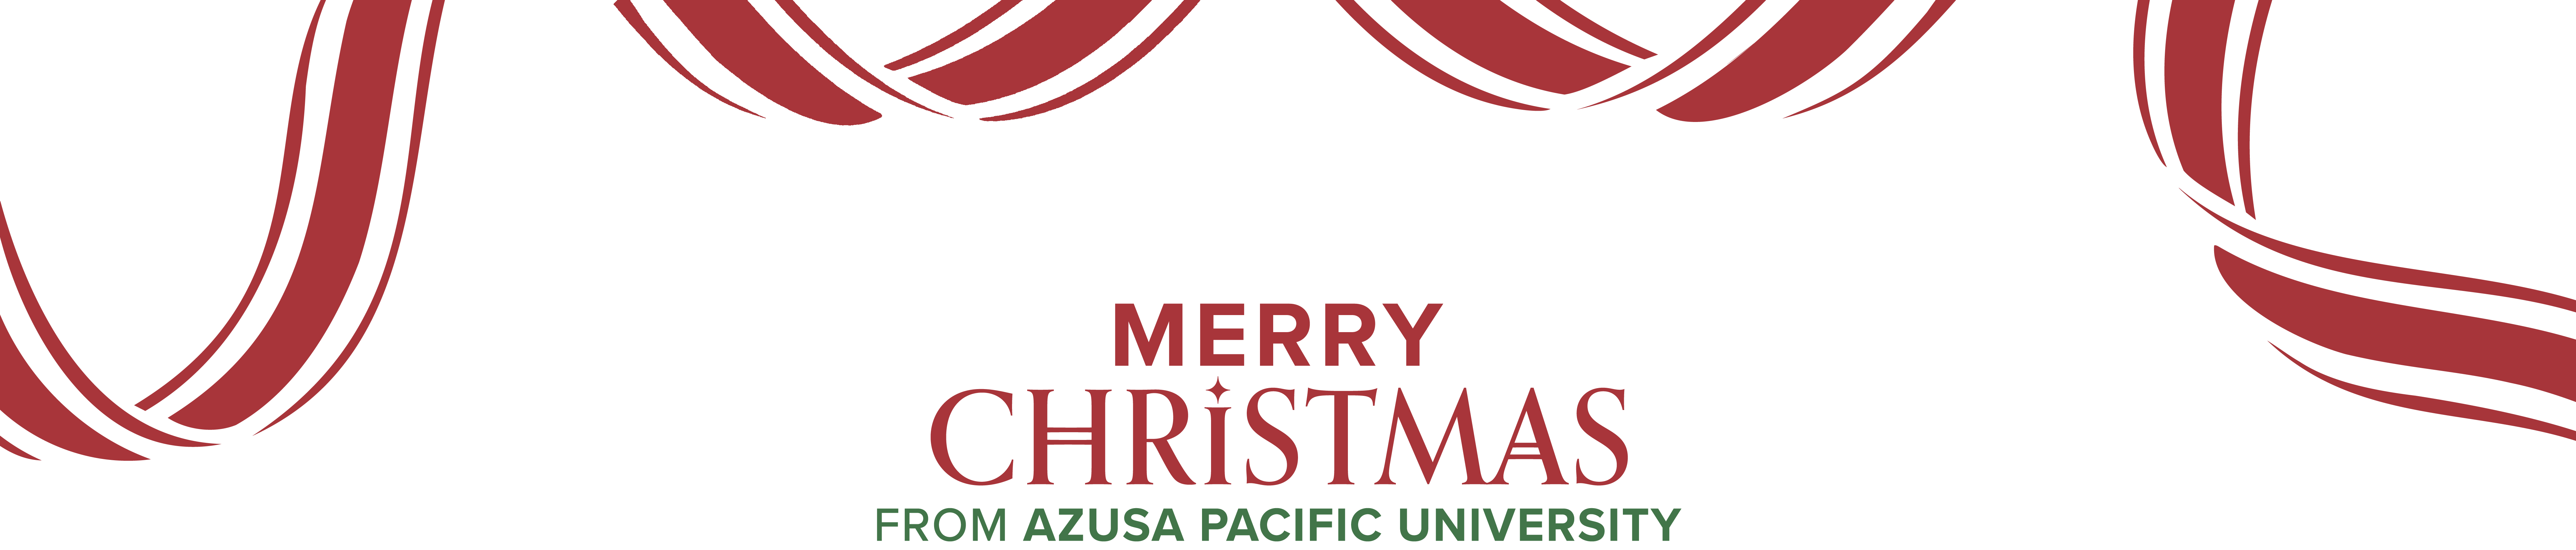 Merry Christmas from Azusa Pacific University